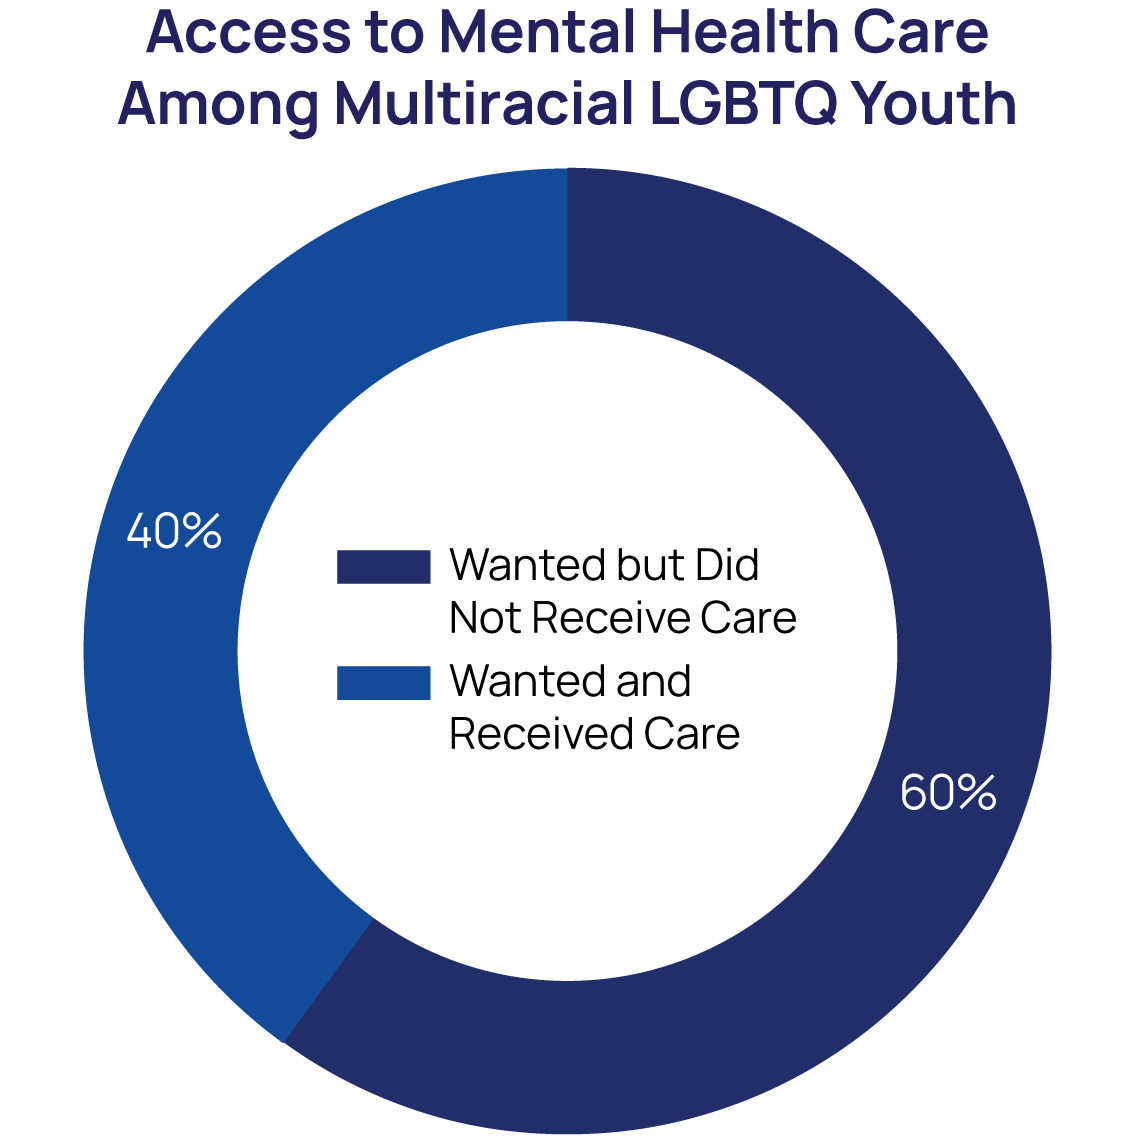 Access to Mental Health Care among Multiracial LGBTQ Youth